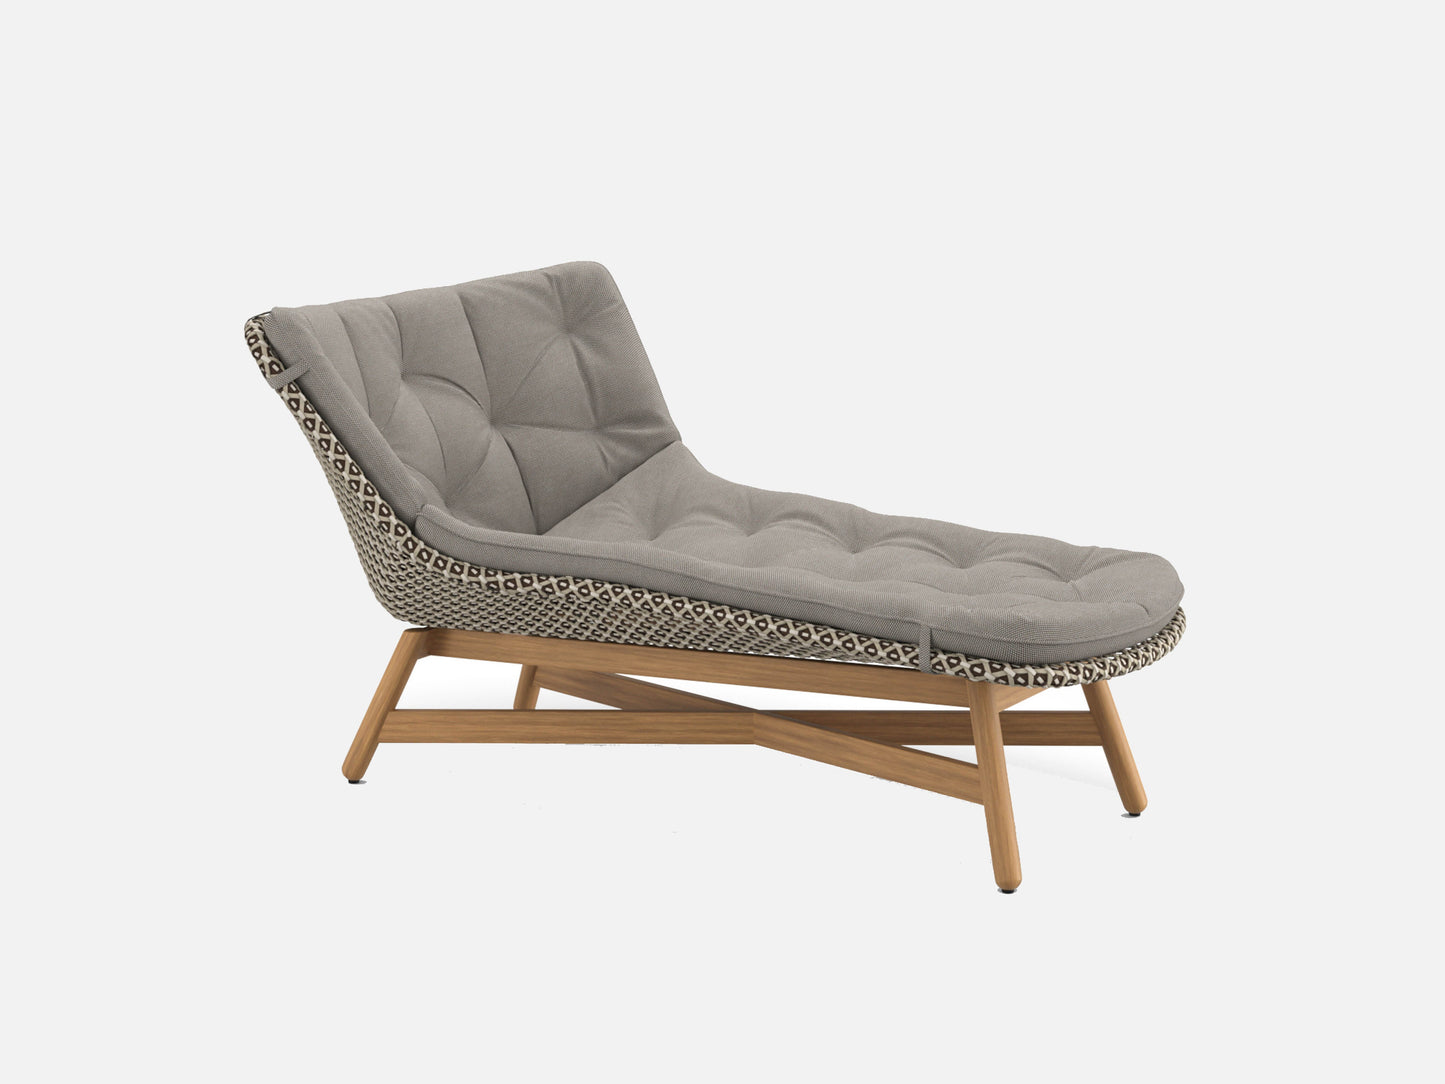 MBRACE Daybed 15% Off Outdoor Furniture DEDON 